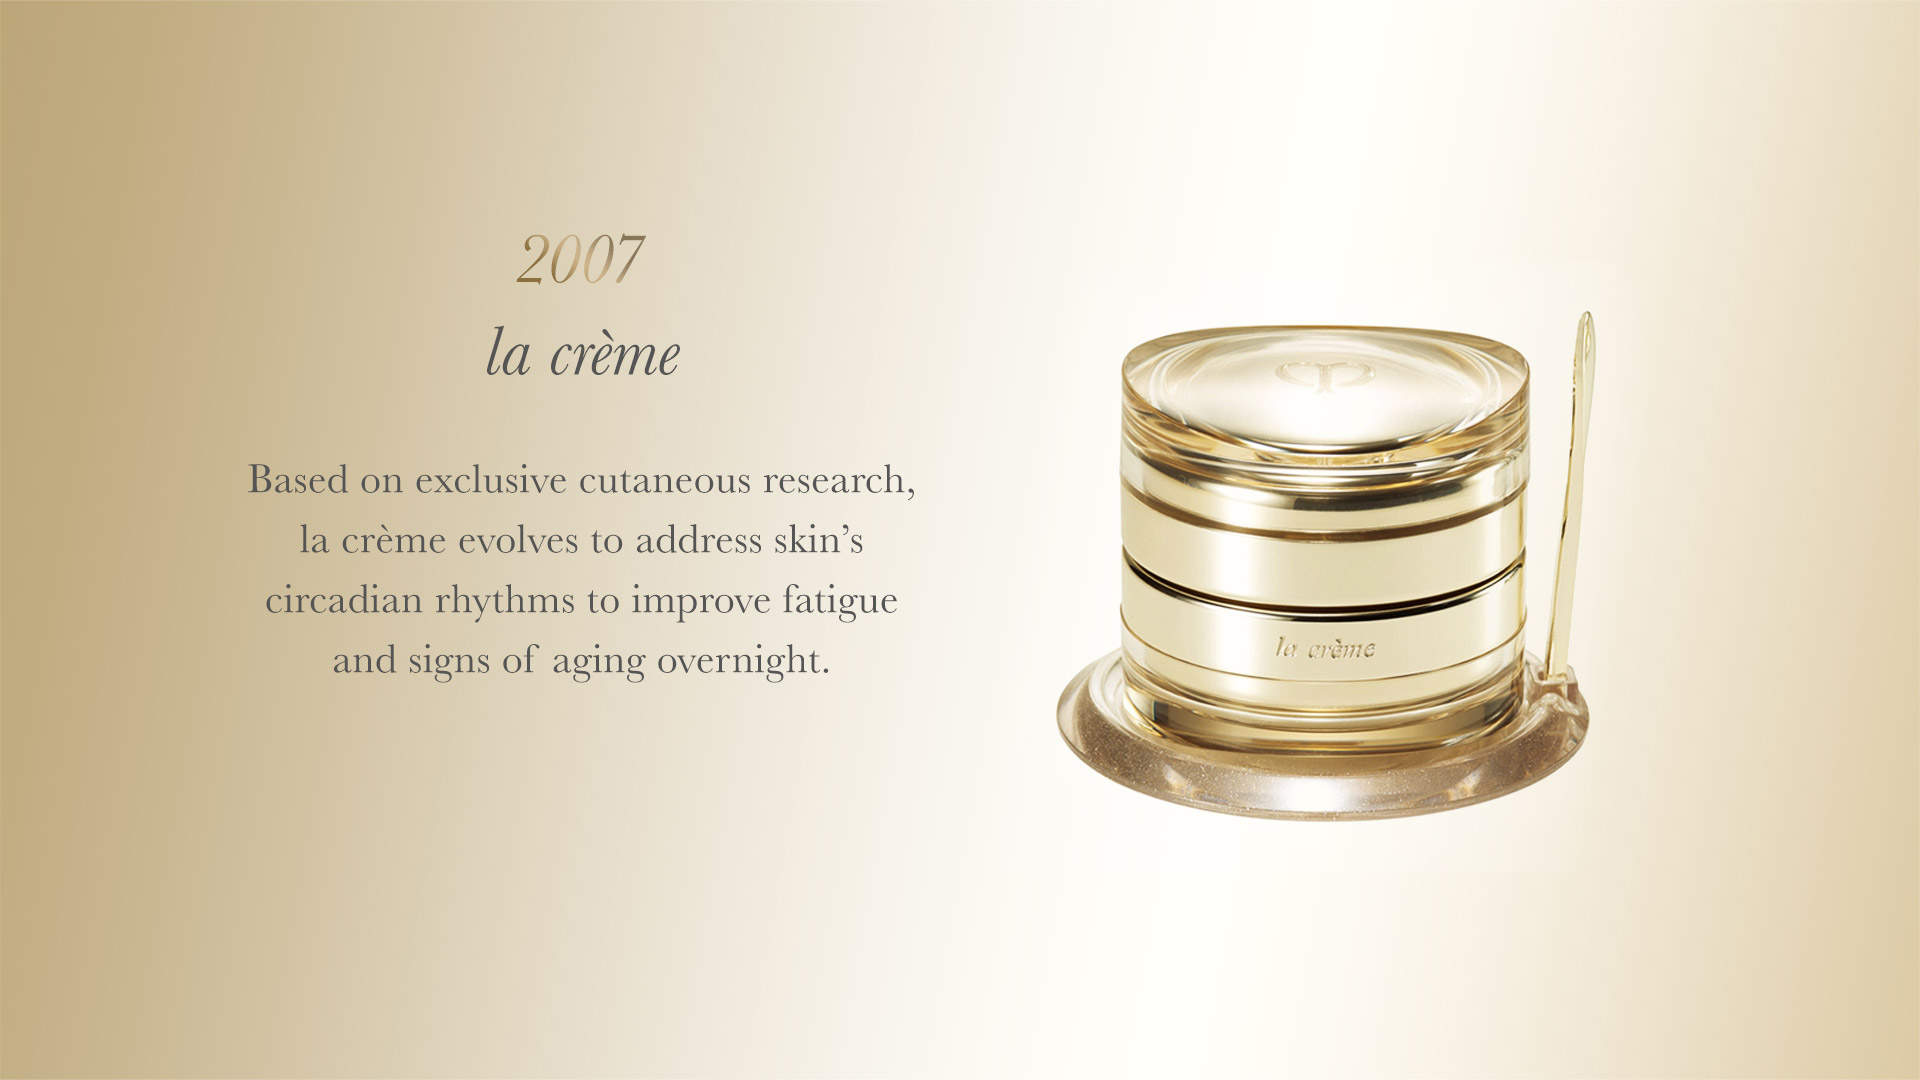 Based on exclusive cutaneous research, la créme evolves to address skin’s circadian rhythms to improve fatigue and signs of aging overnight. 